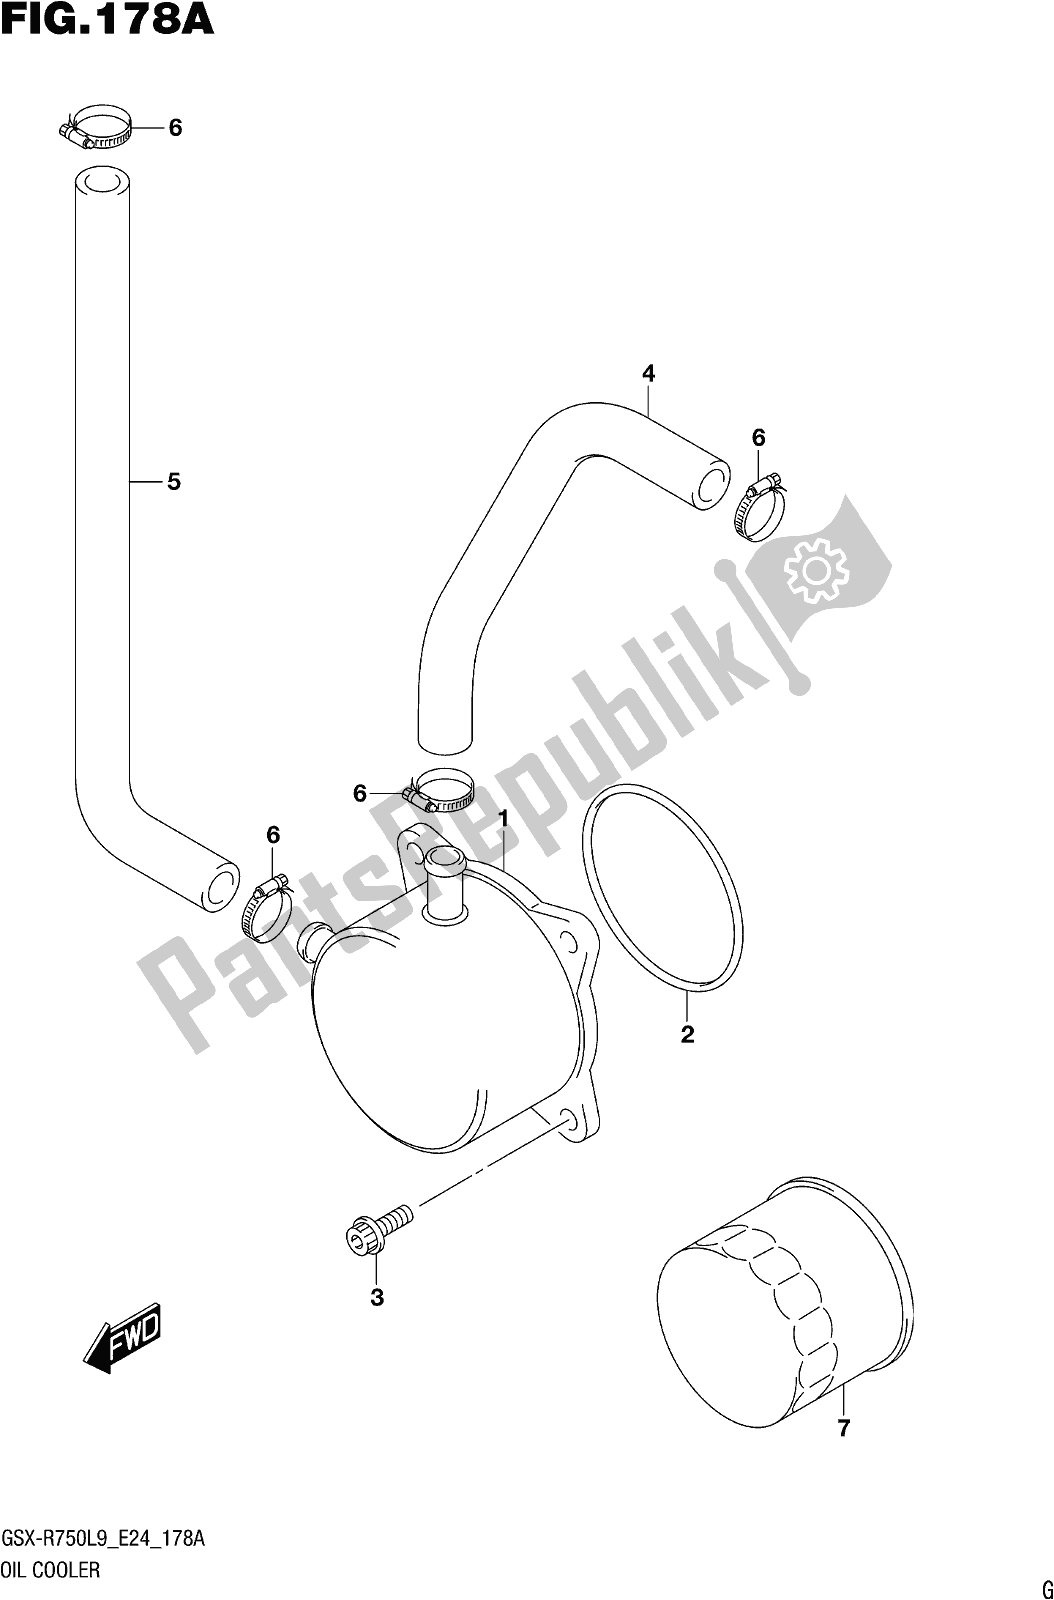 All parts for the Fig. 178a Oil Cooler of the Suzuki Gsx-r 750 2019